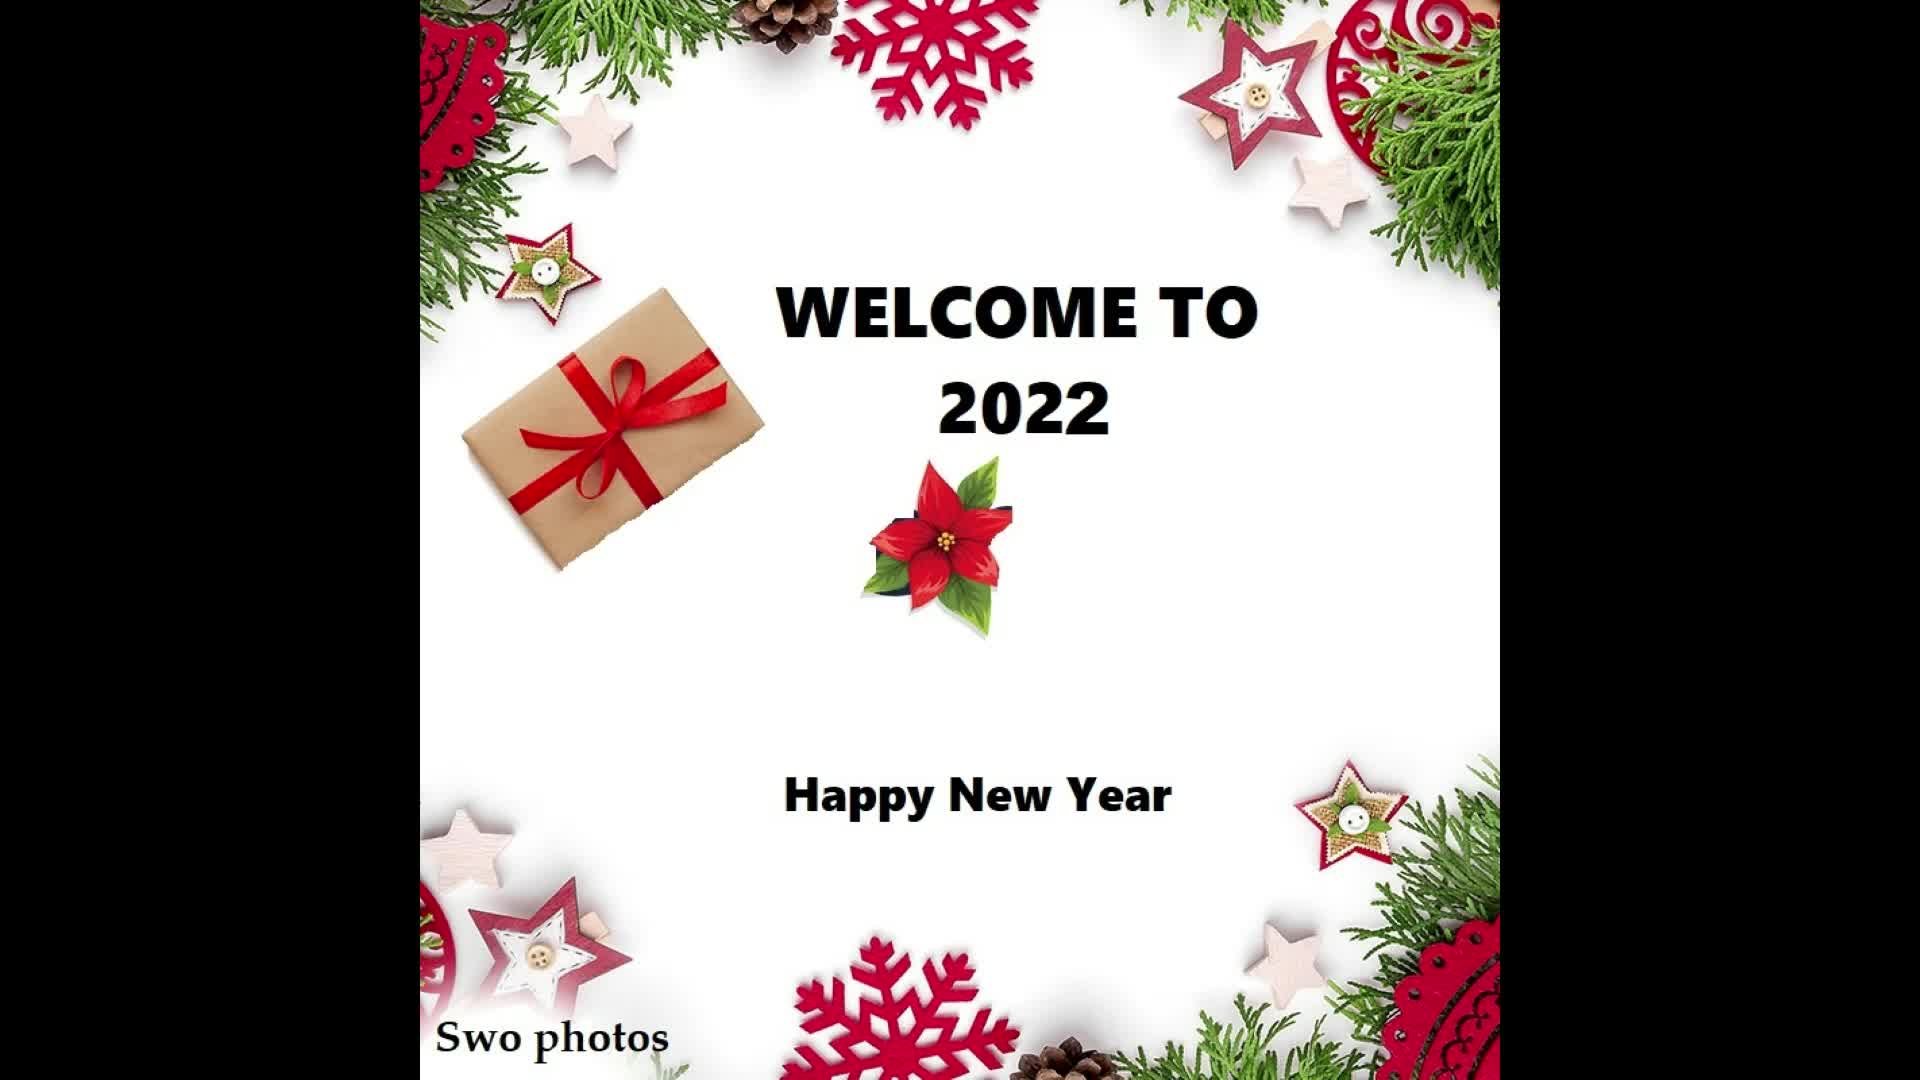 Welcome to 2022 - via Sweetness-Don't-lie thumbnail